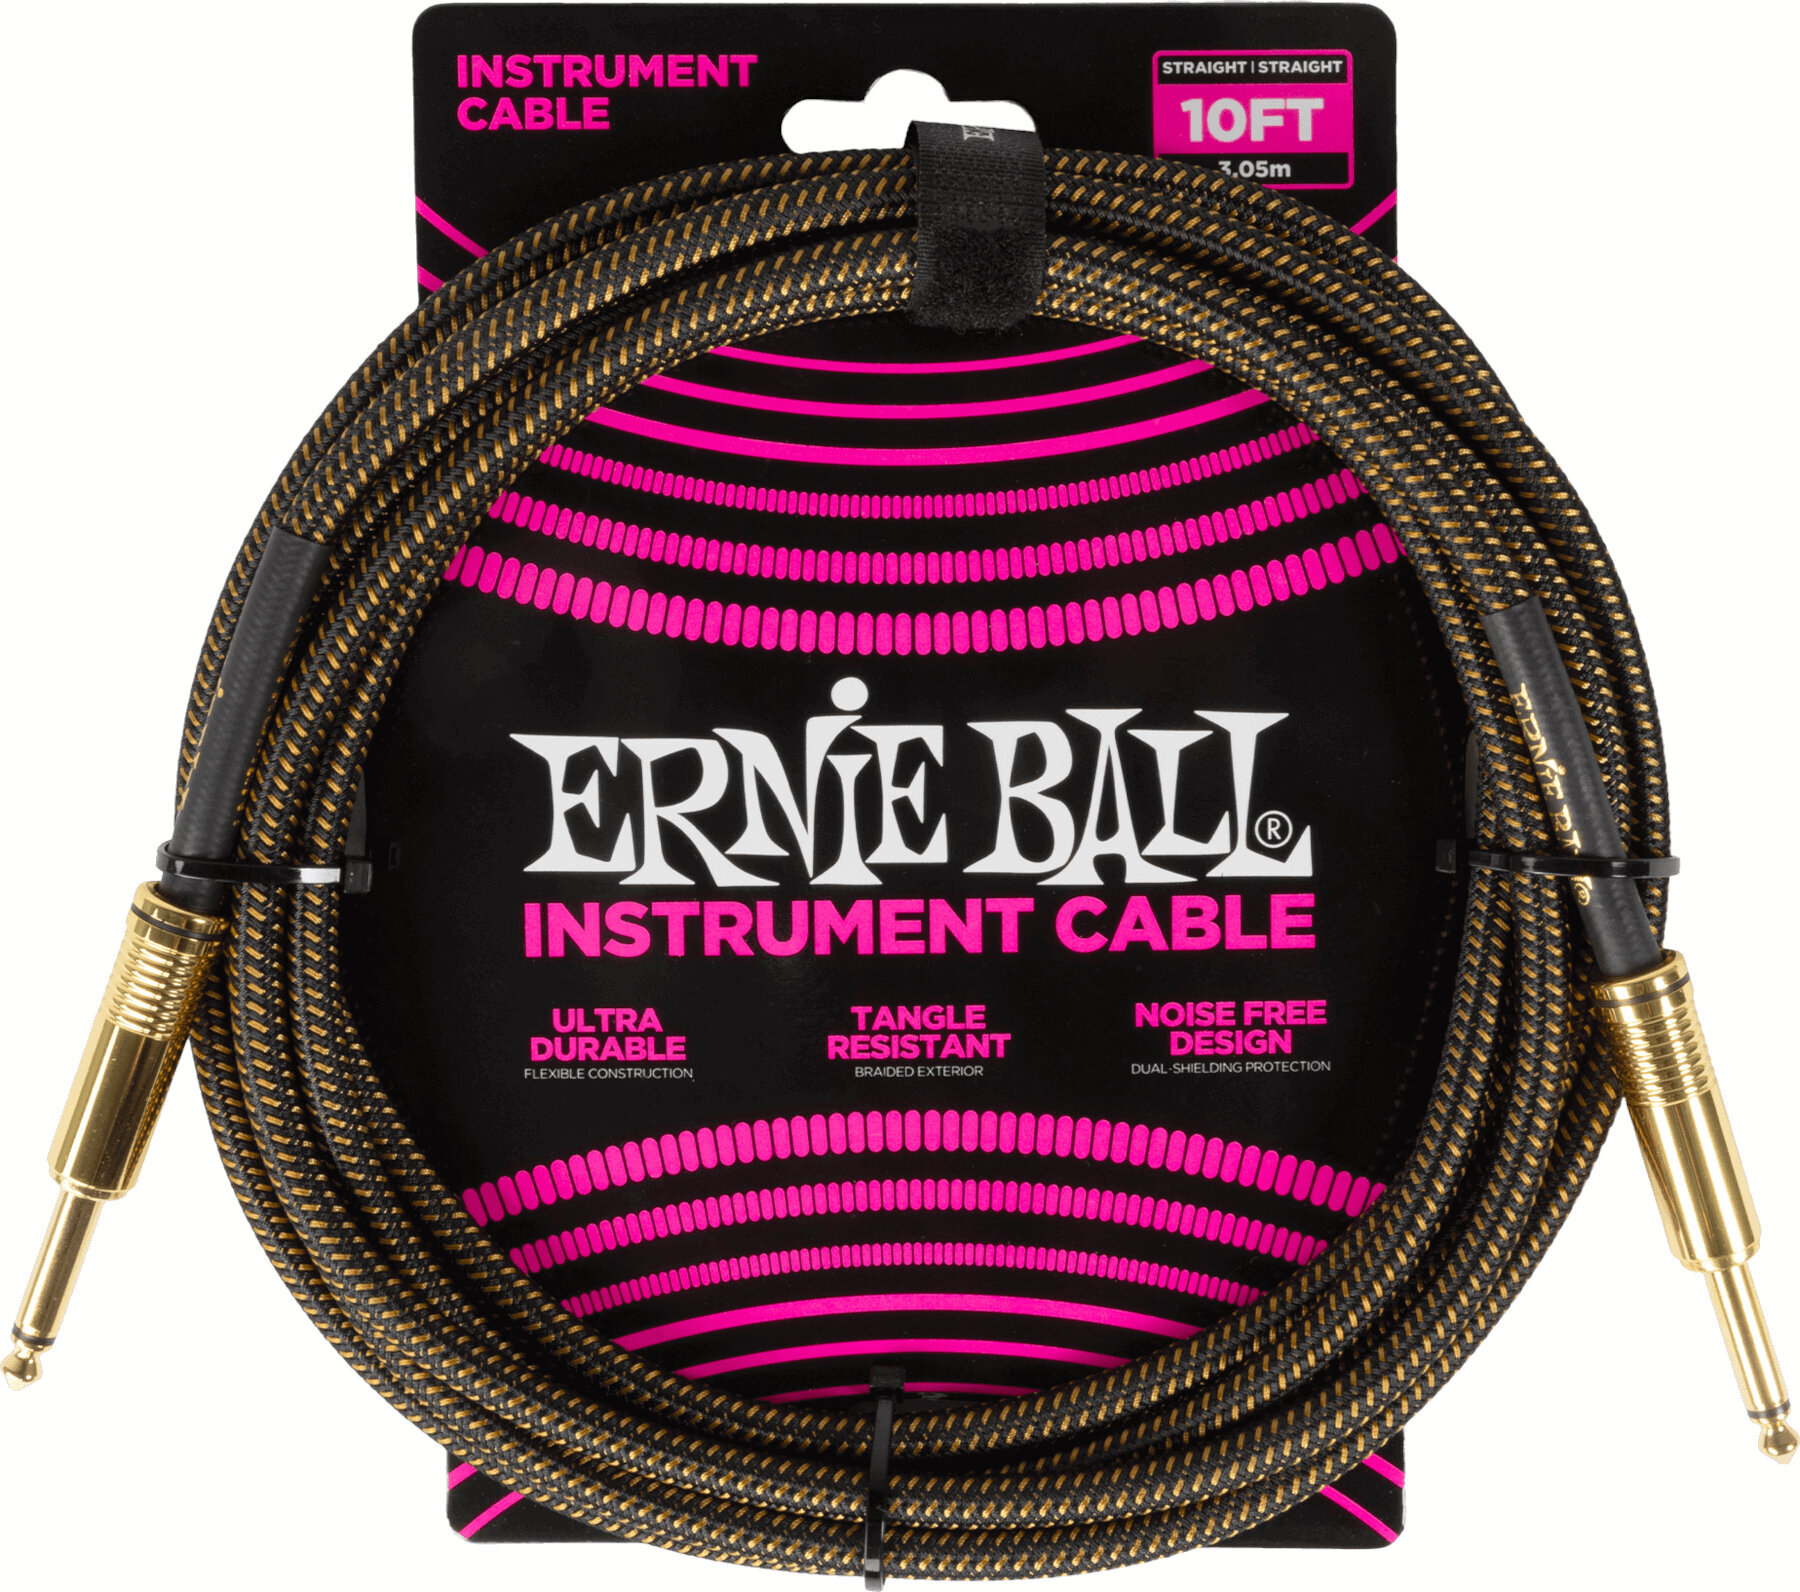 Instrument Cable Ernie Ball Braided Instrument Cable Straight/Straight Brown 3 m Straight - Straight